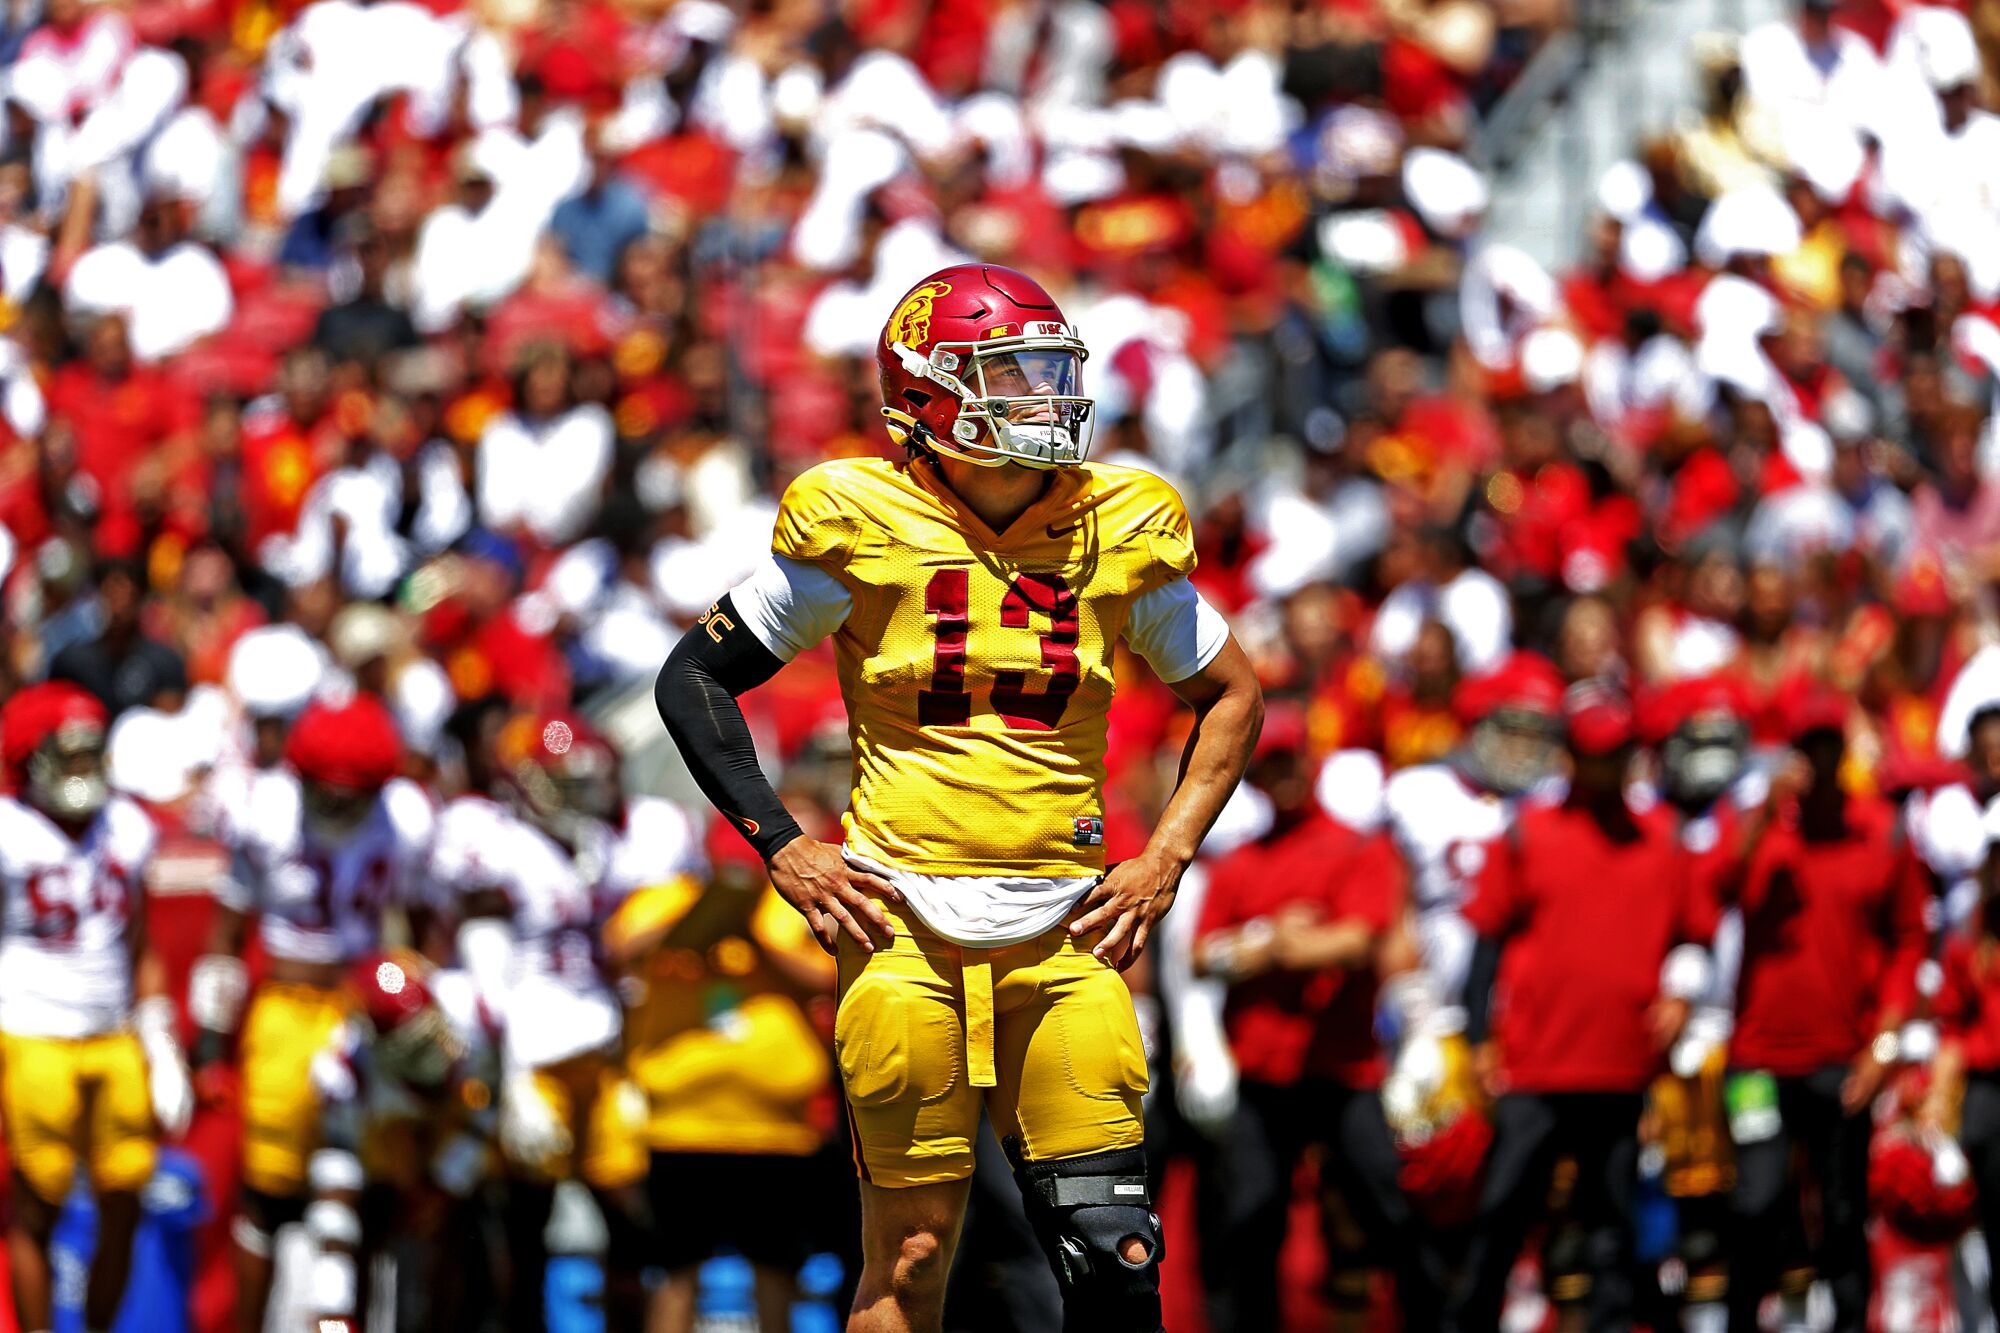 Quarterback Caleb Williams pauses in between plays in the USC Spring Game at the Coliseum on Saturday.